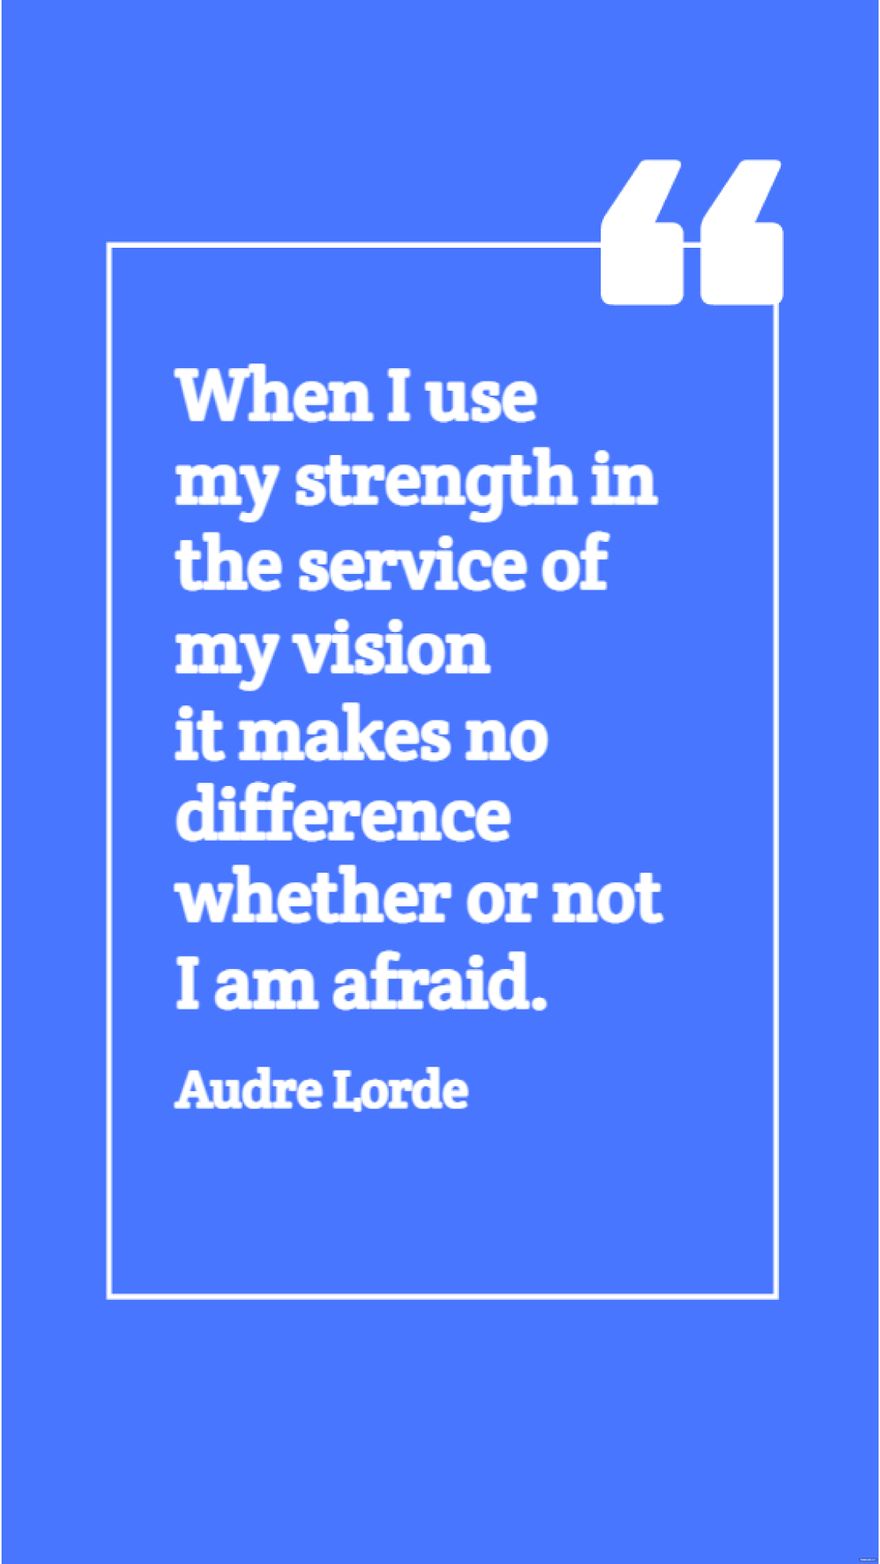 Free Audre Lorde - When I use my strength in the service of my vision it makes no difference whether or not I am afraid. in JPG